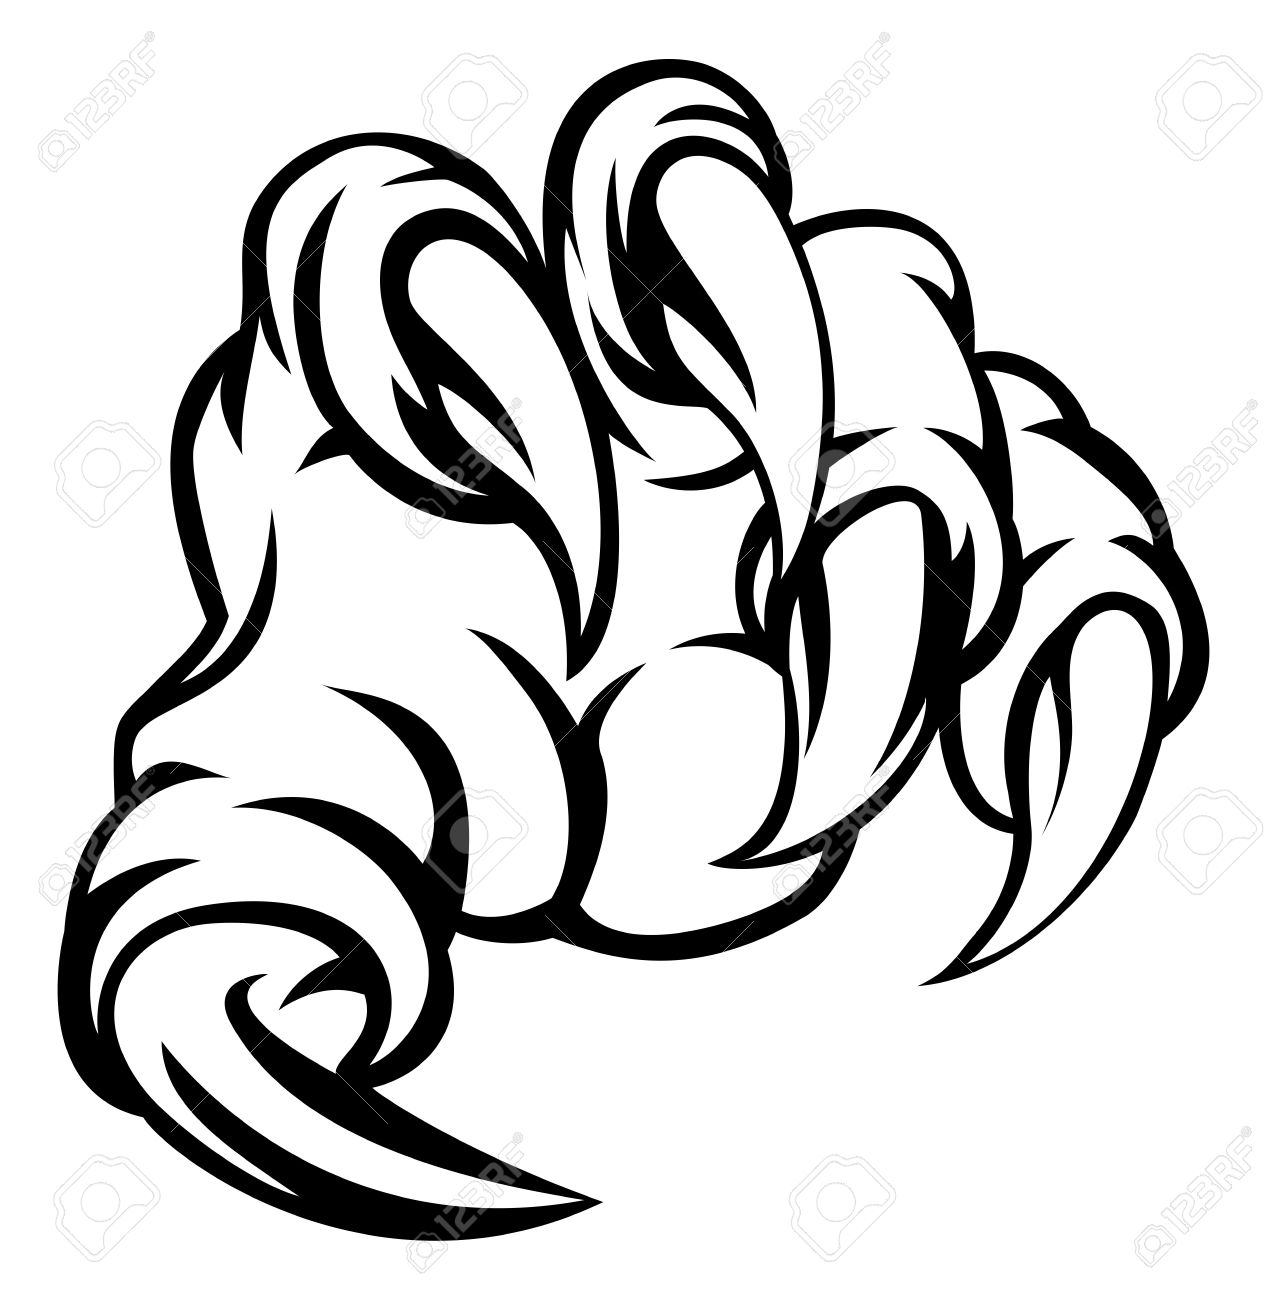 A monster claw hand illustration.